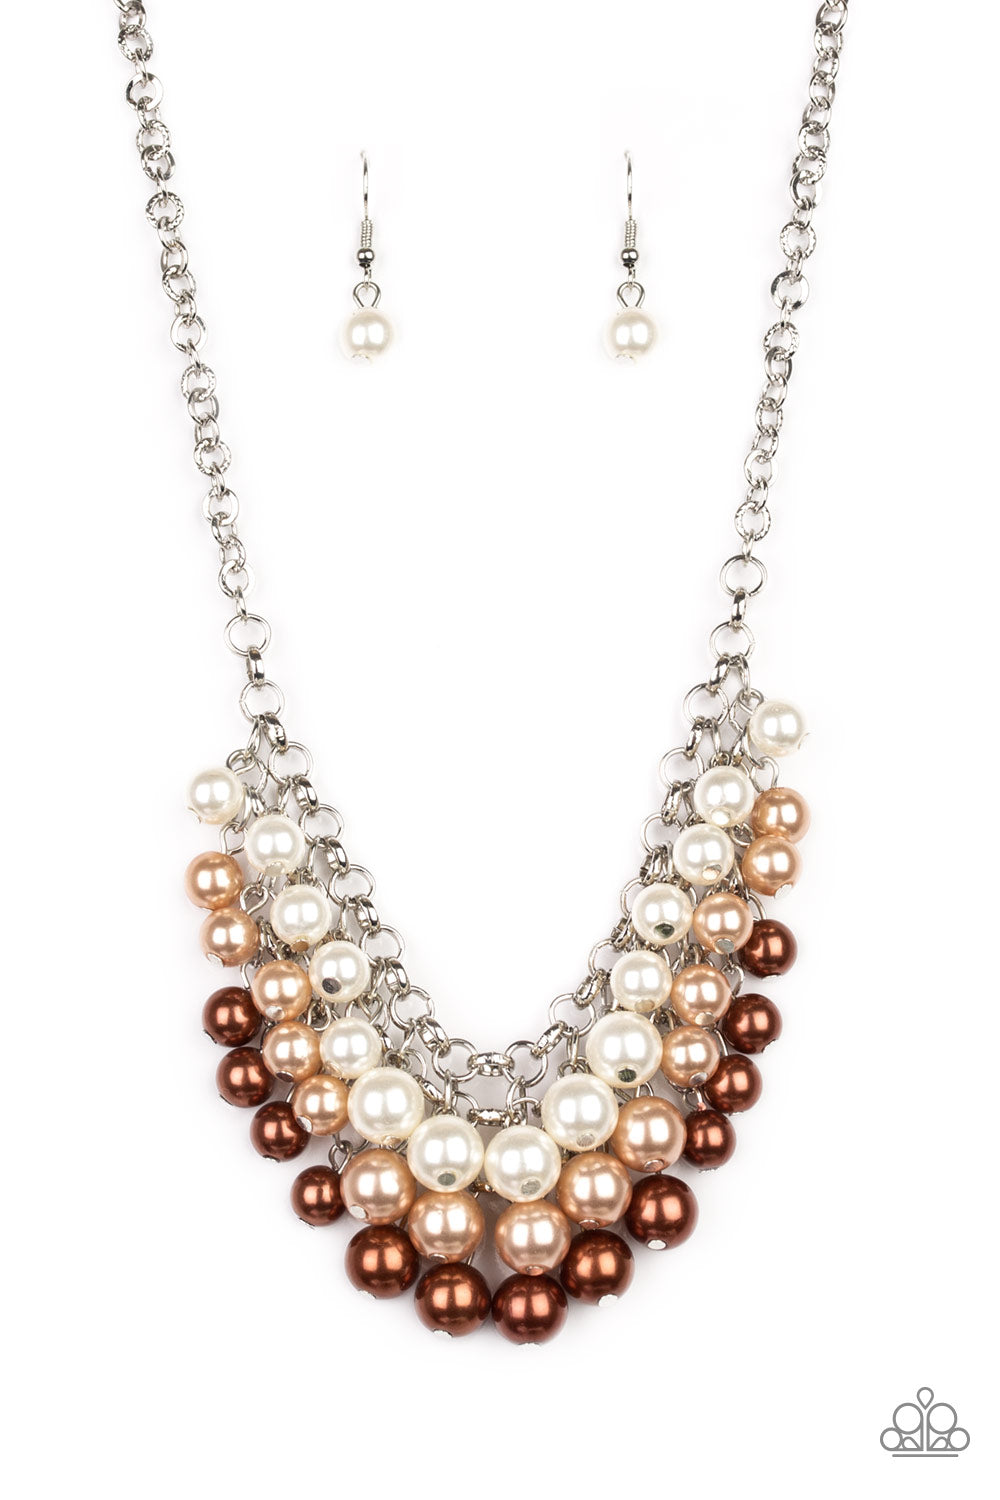 Paparazzi Accessories Run For The HEELS! - Copper Necklaces - Lady T Accessories